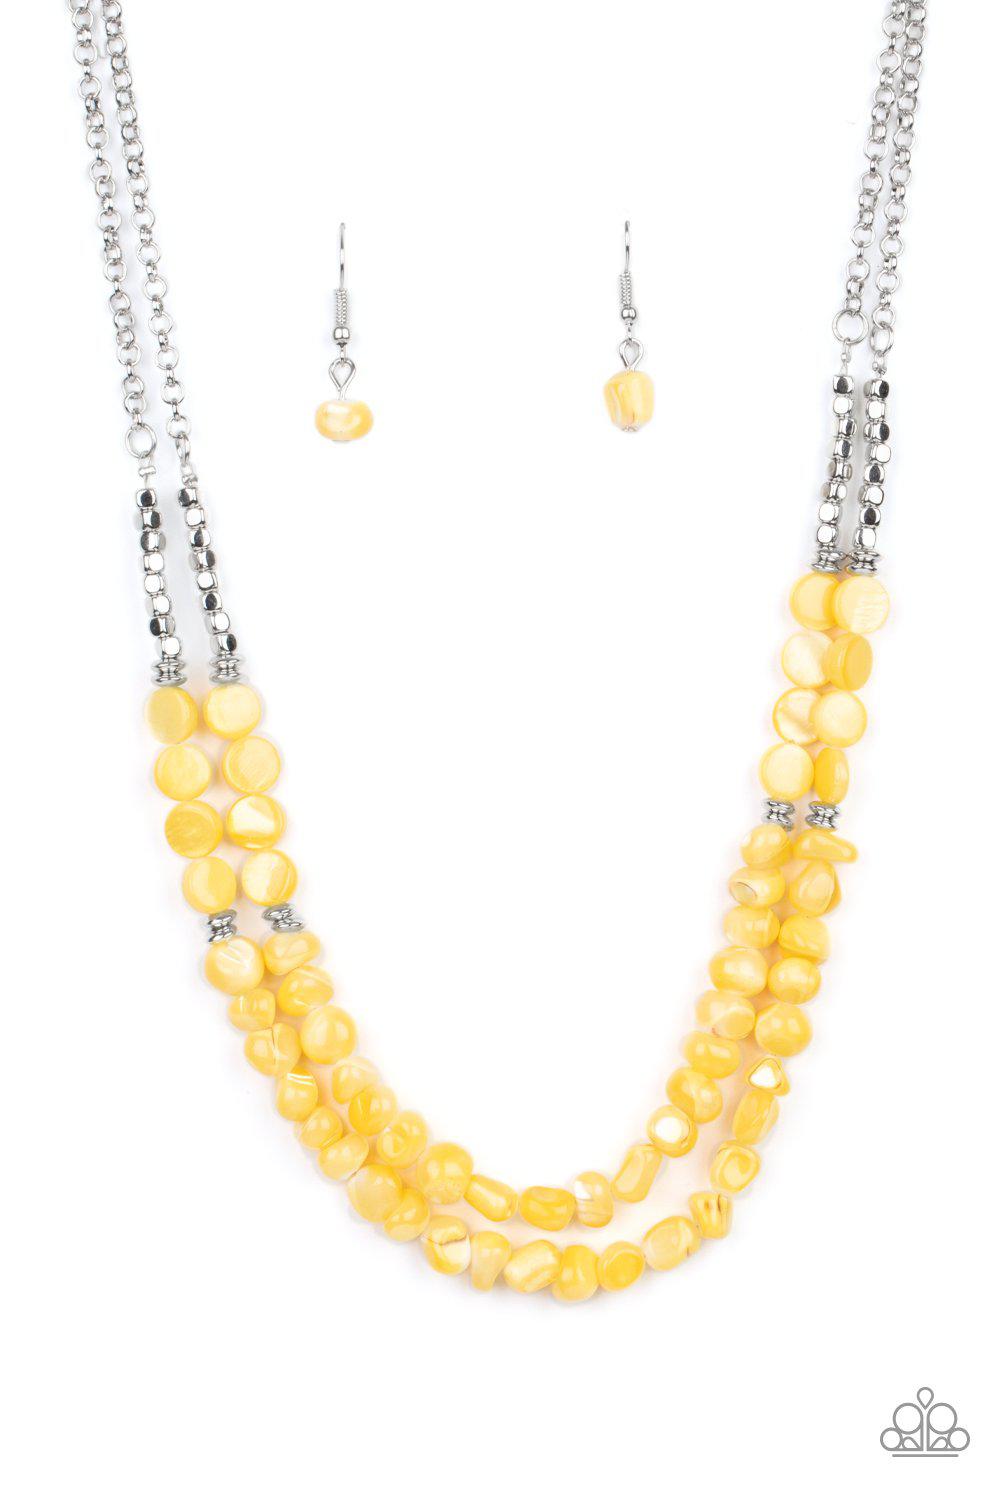 Staycation Status Yellow and Silver Necklace - Paparazzi Accessories- lightbox - CarasShop.com - $5 Jewelry by Cara Jewels